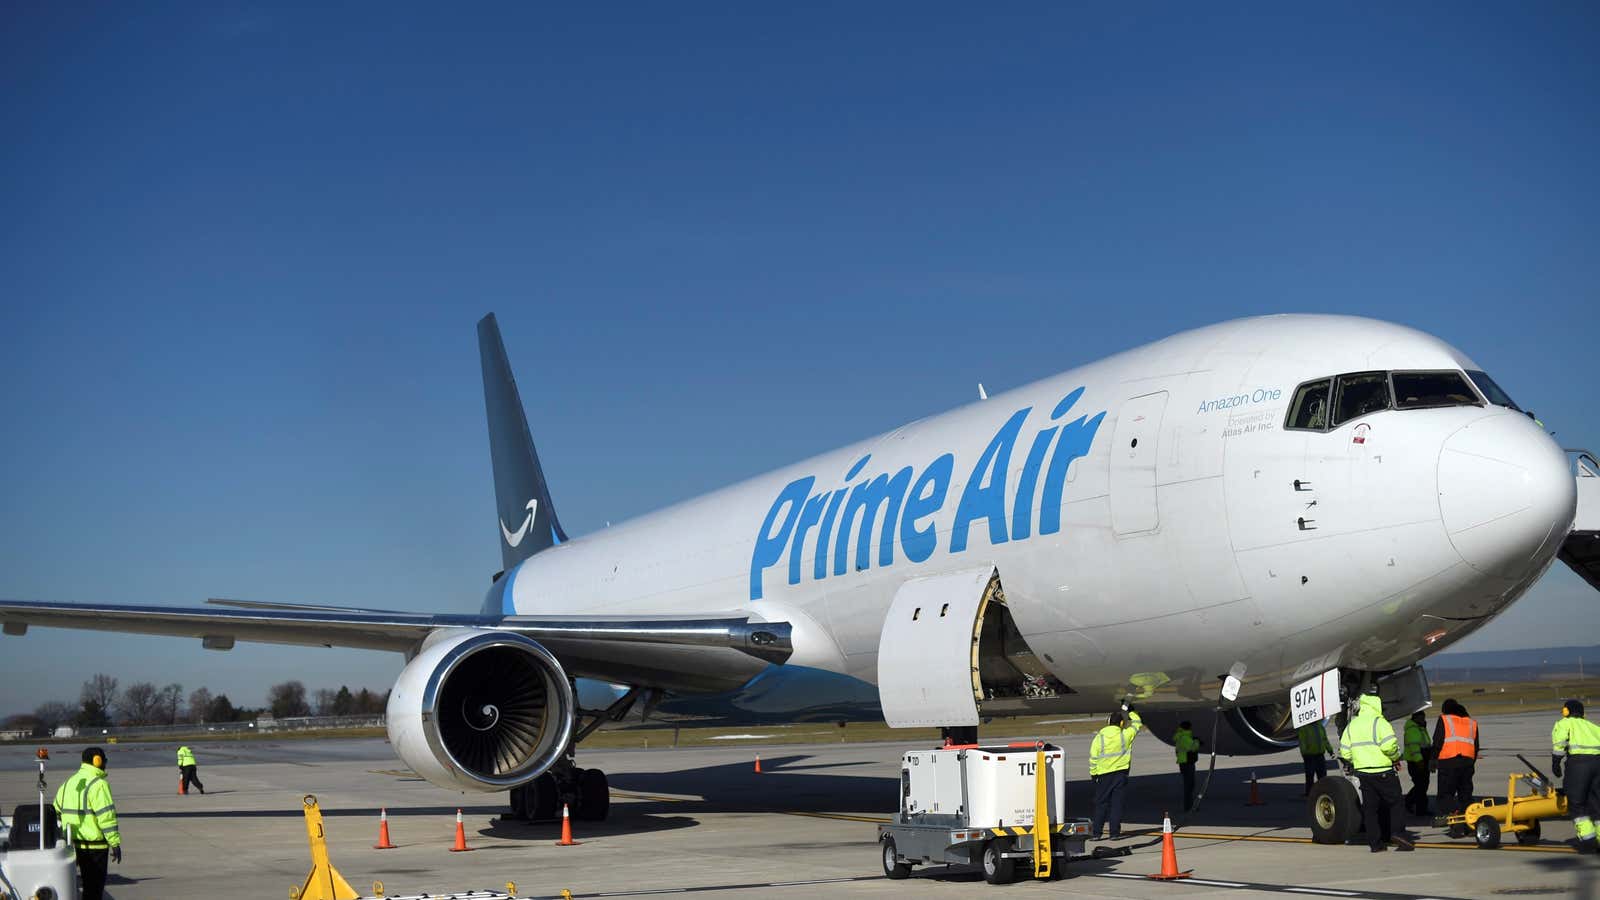 A wide body aircraft emblazoned with Amazon’s Prime logo is unloaded at Lehigh Valley International Airport in Allentown, Pennsylvania.